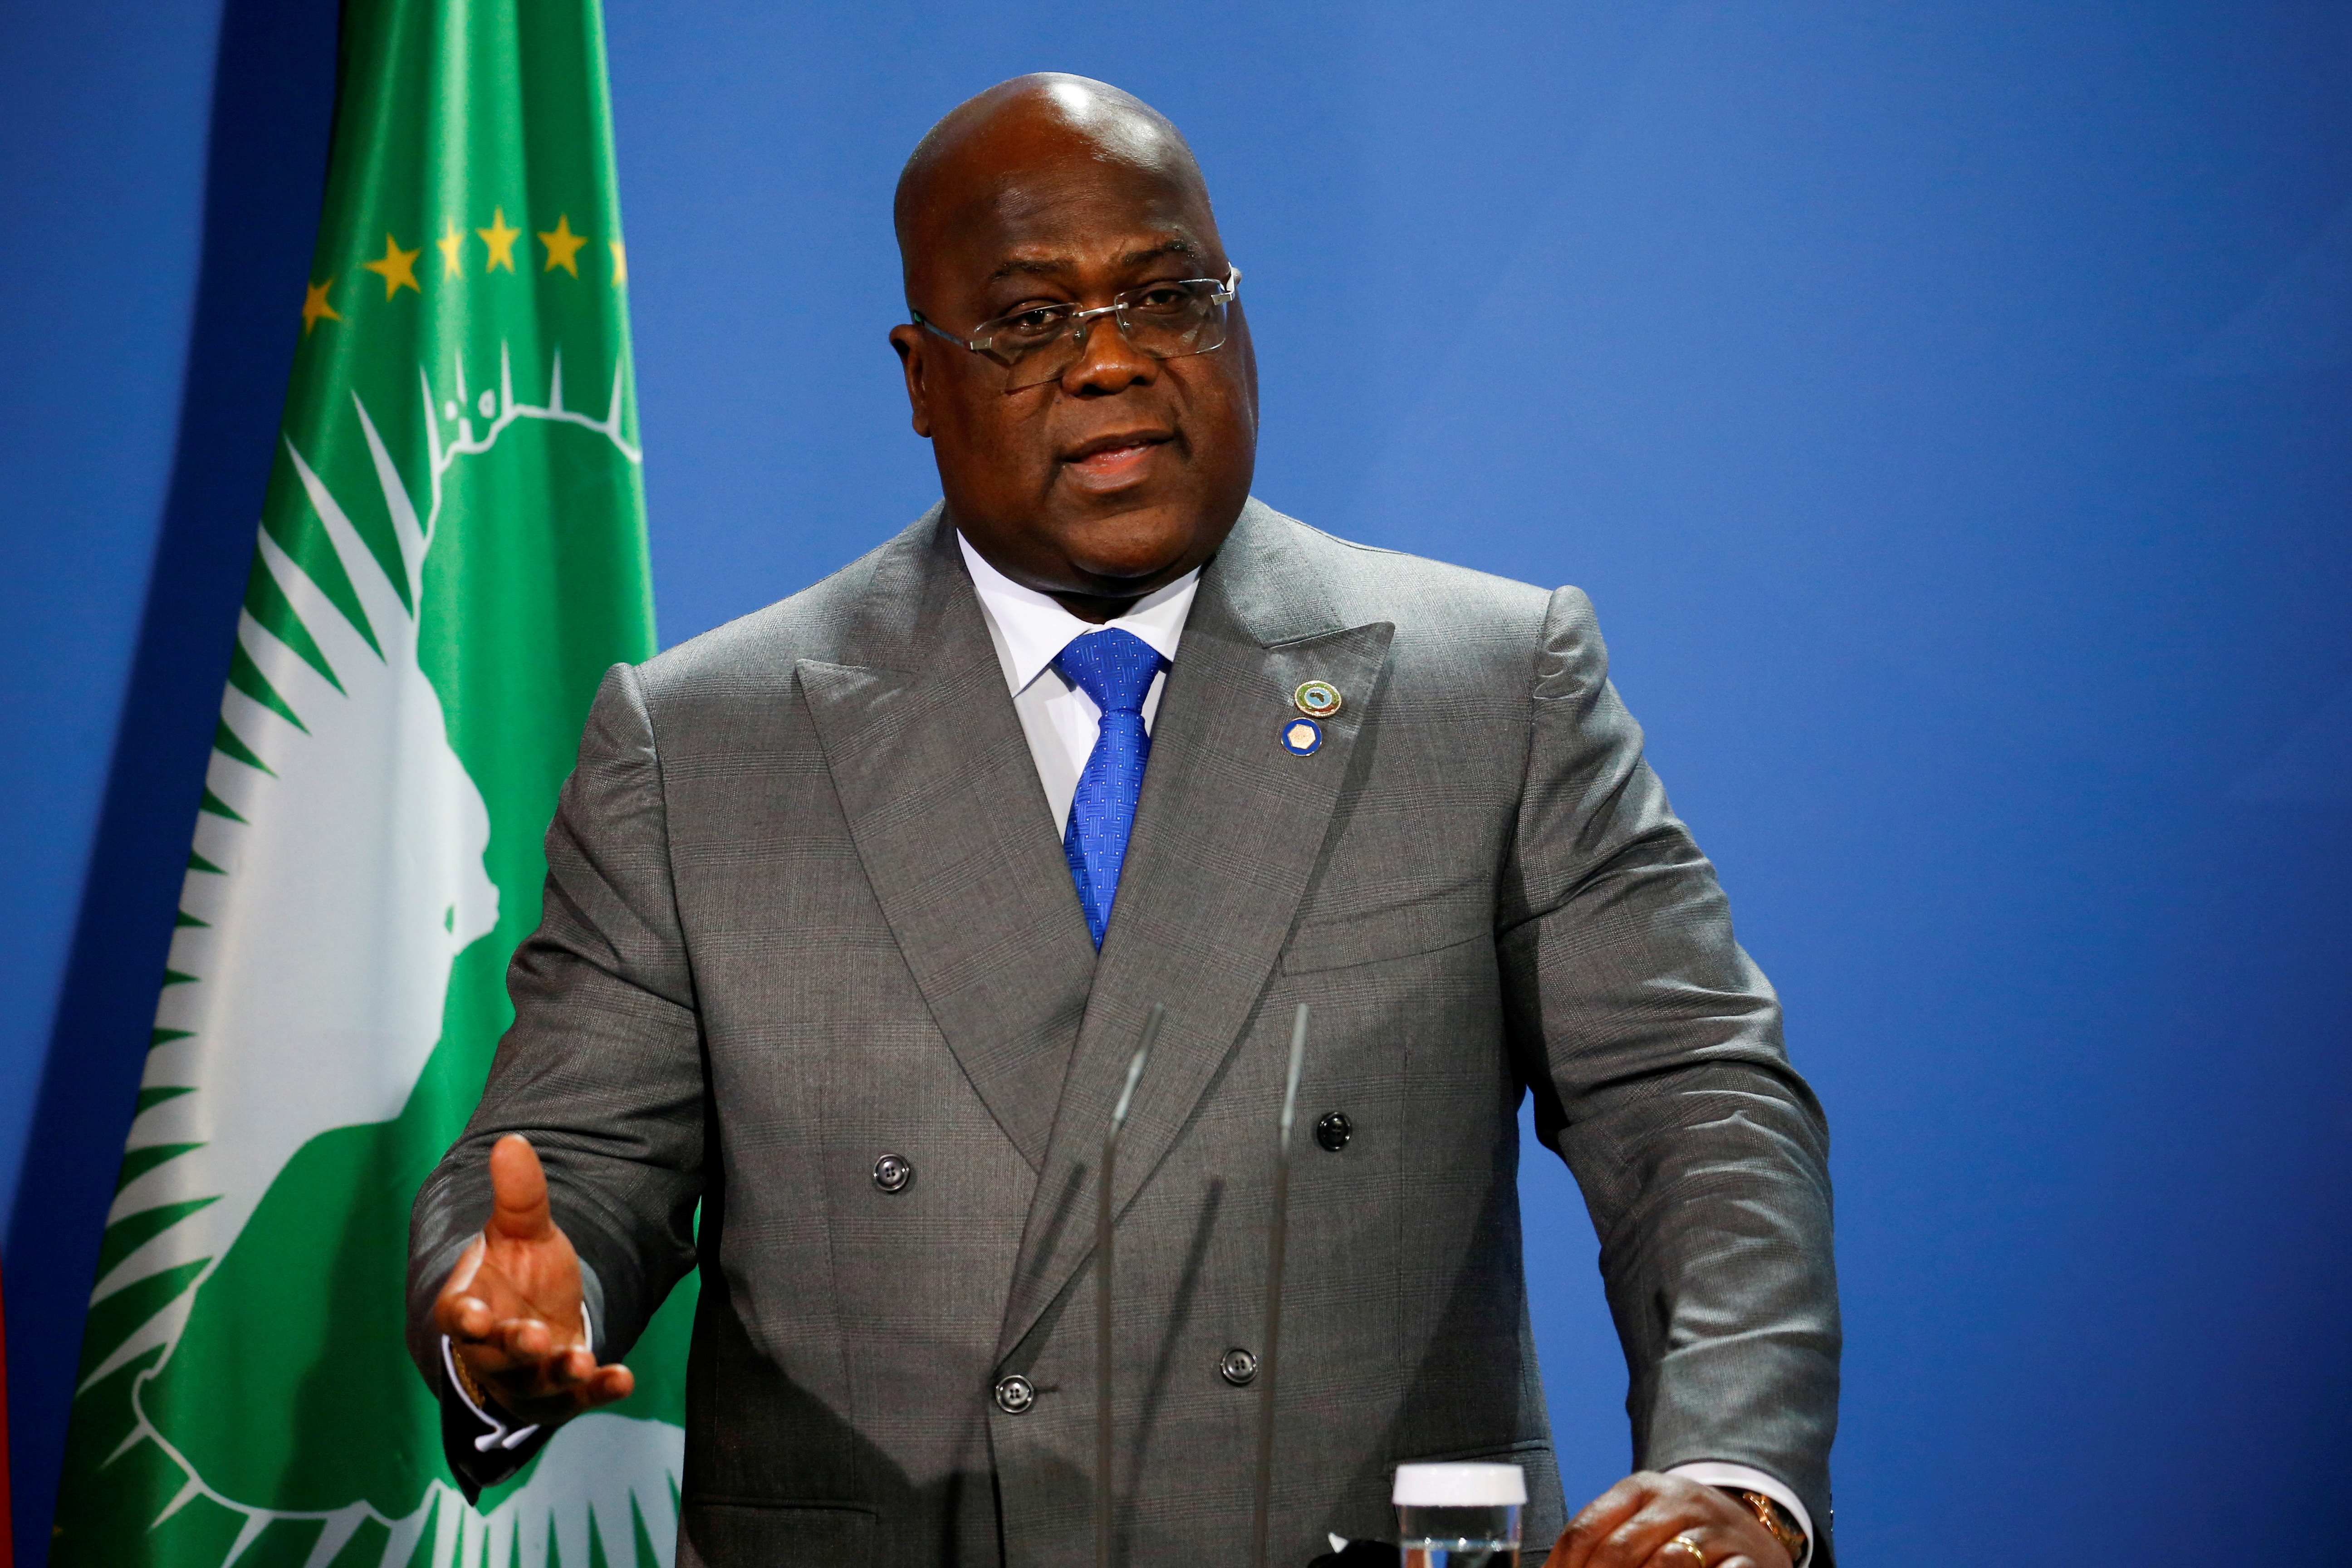 Felix Tshisekedi, President of the Democratic Republic of the Congo attends a news conference in Berlin